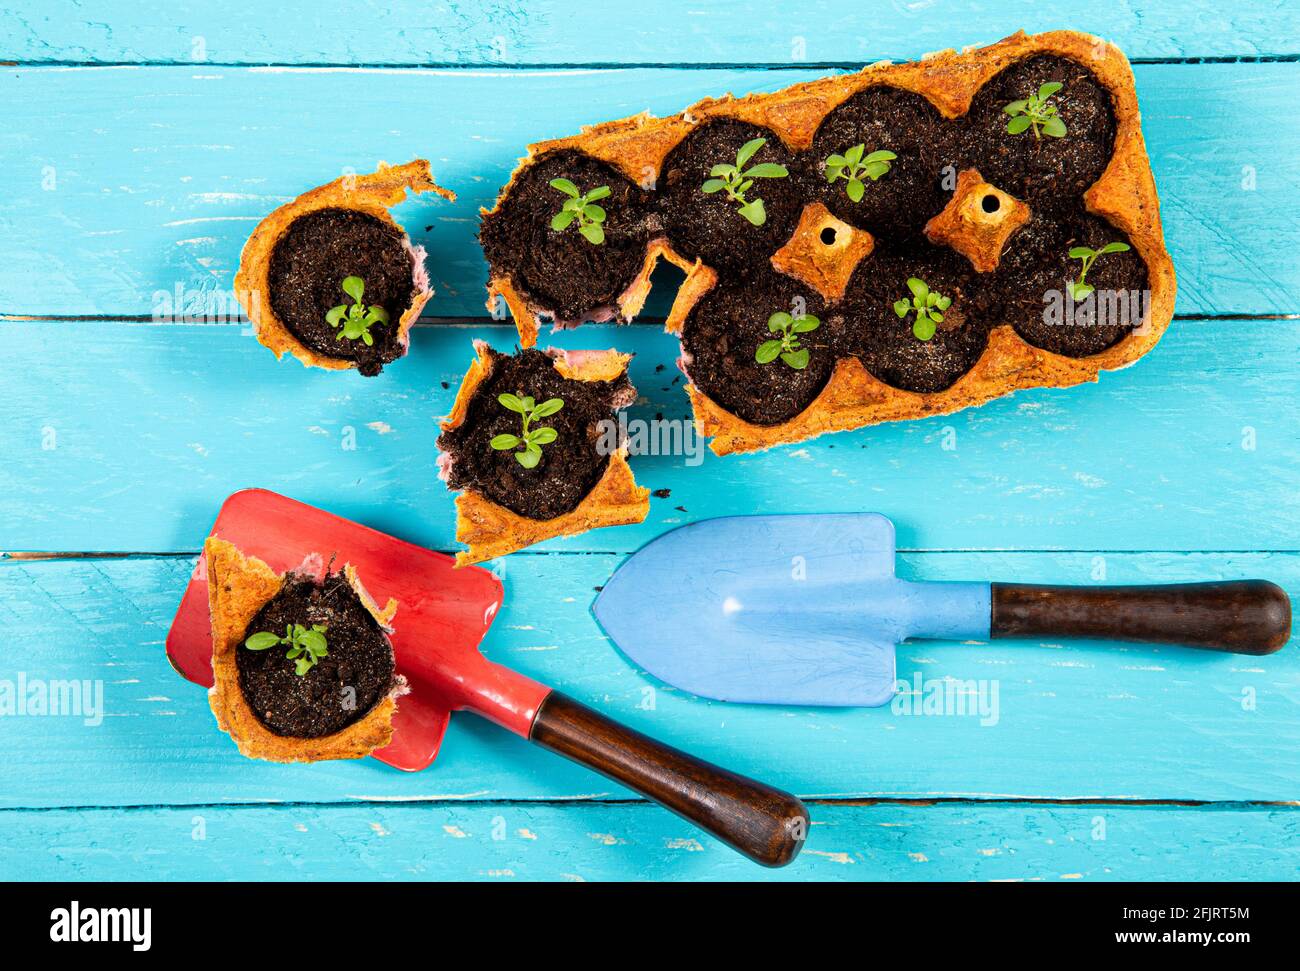 Small starter plats growing in yellow carton chicken egg box in black soil. Break off the biodegradable cup and plant in soil outdoors. Zero waste. Stock Photo